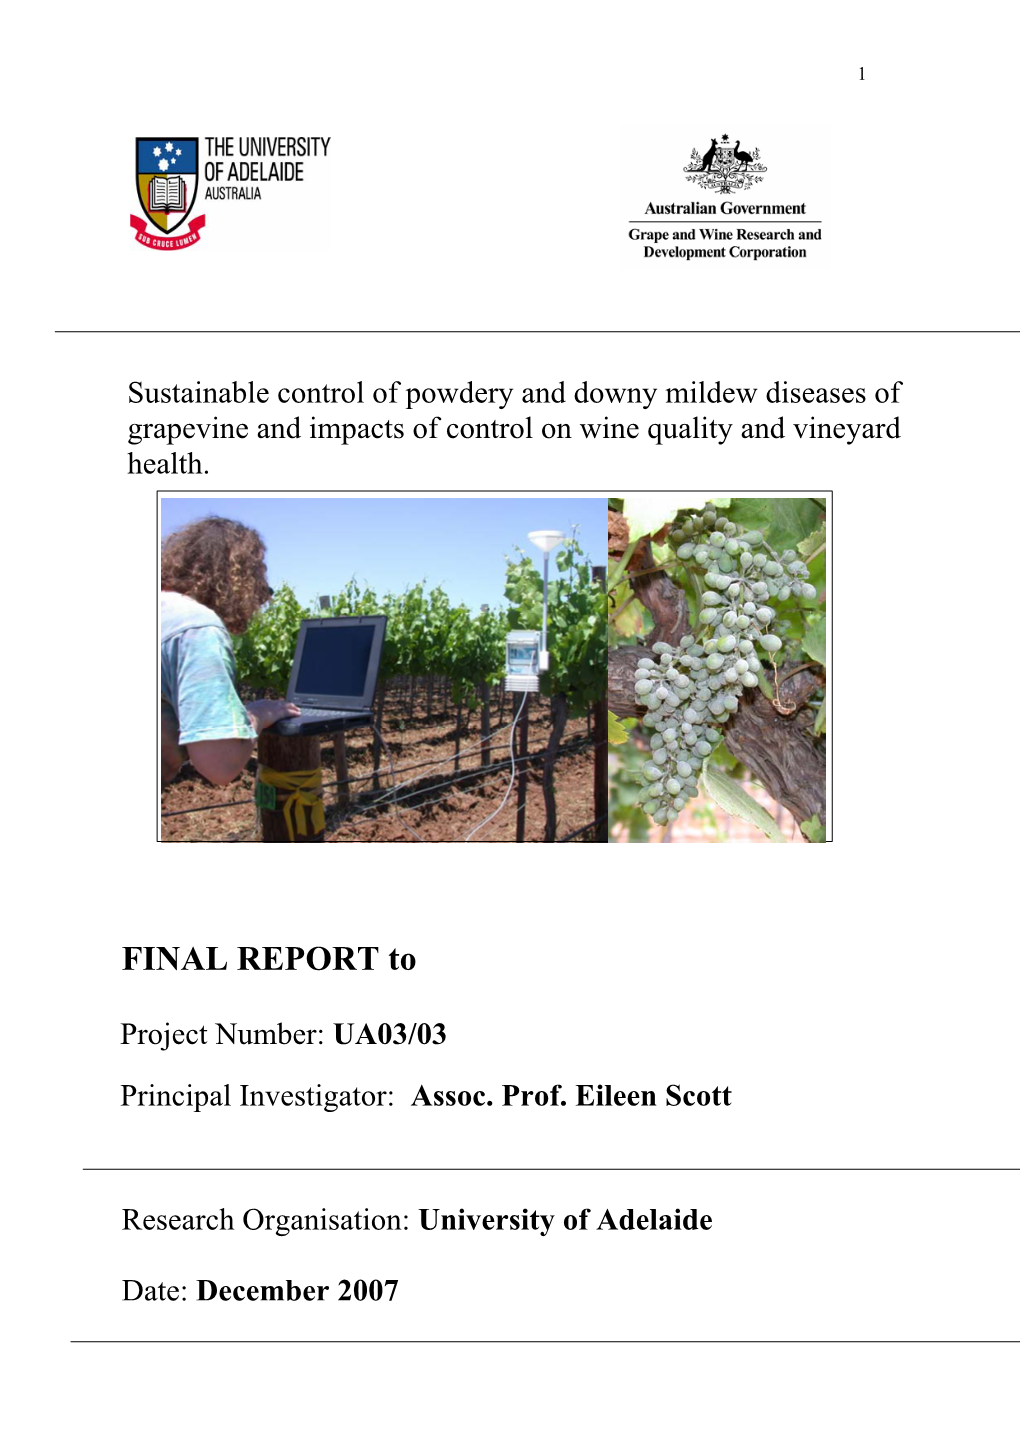 Sustainable Control of Powdery and Downy Mildew Diseases of Grapevine and Impacts of Control on Wine Quality and Vineyard Health